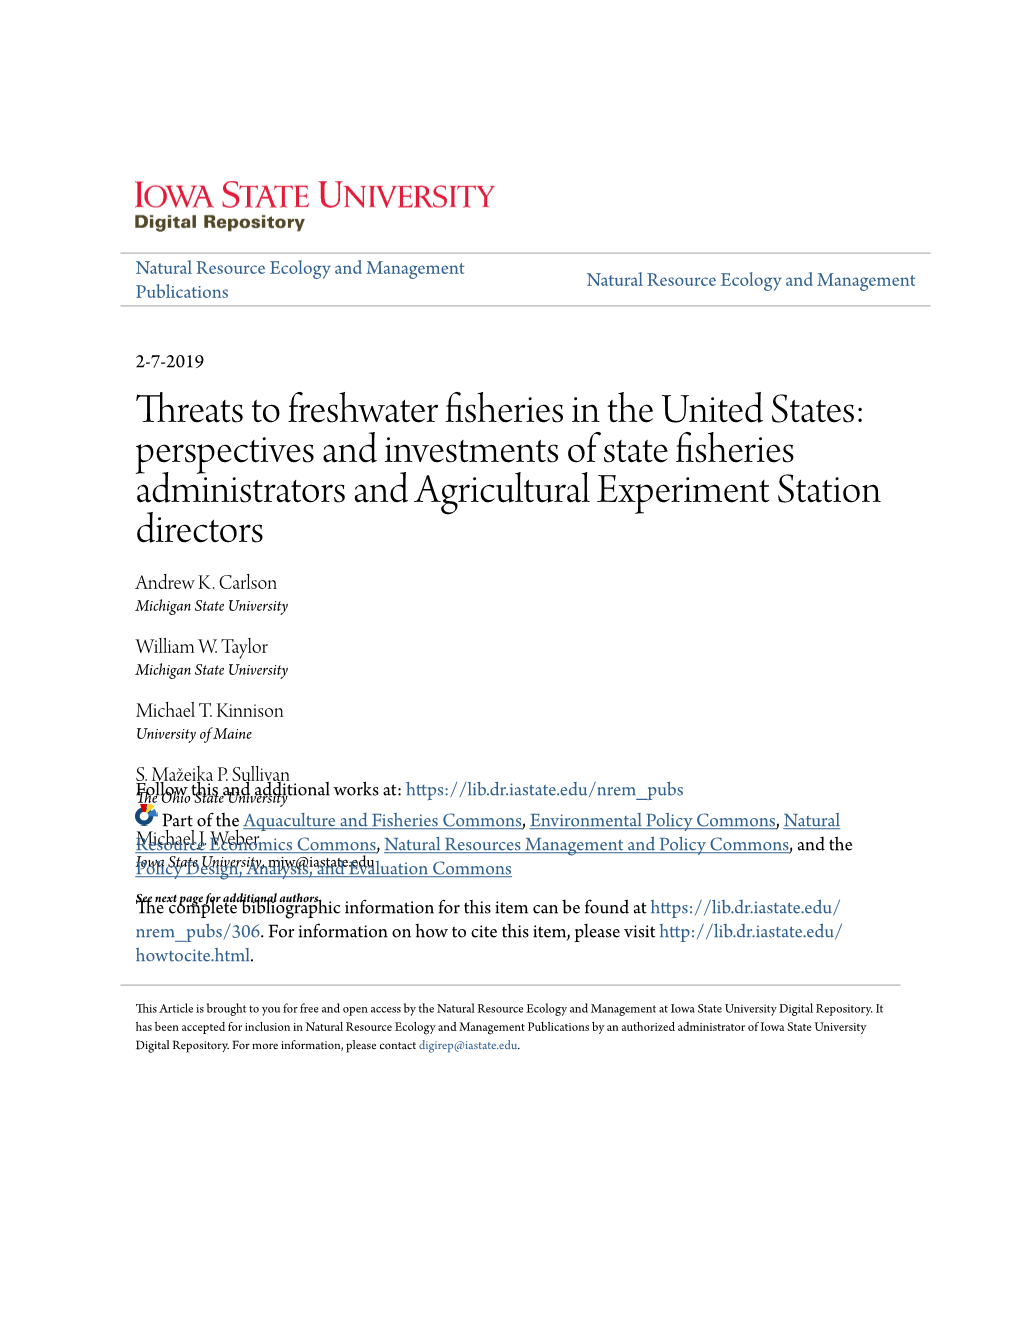 Threats to Freshwater Fisheries in the United States